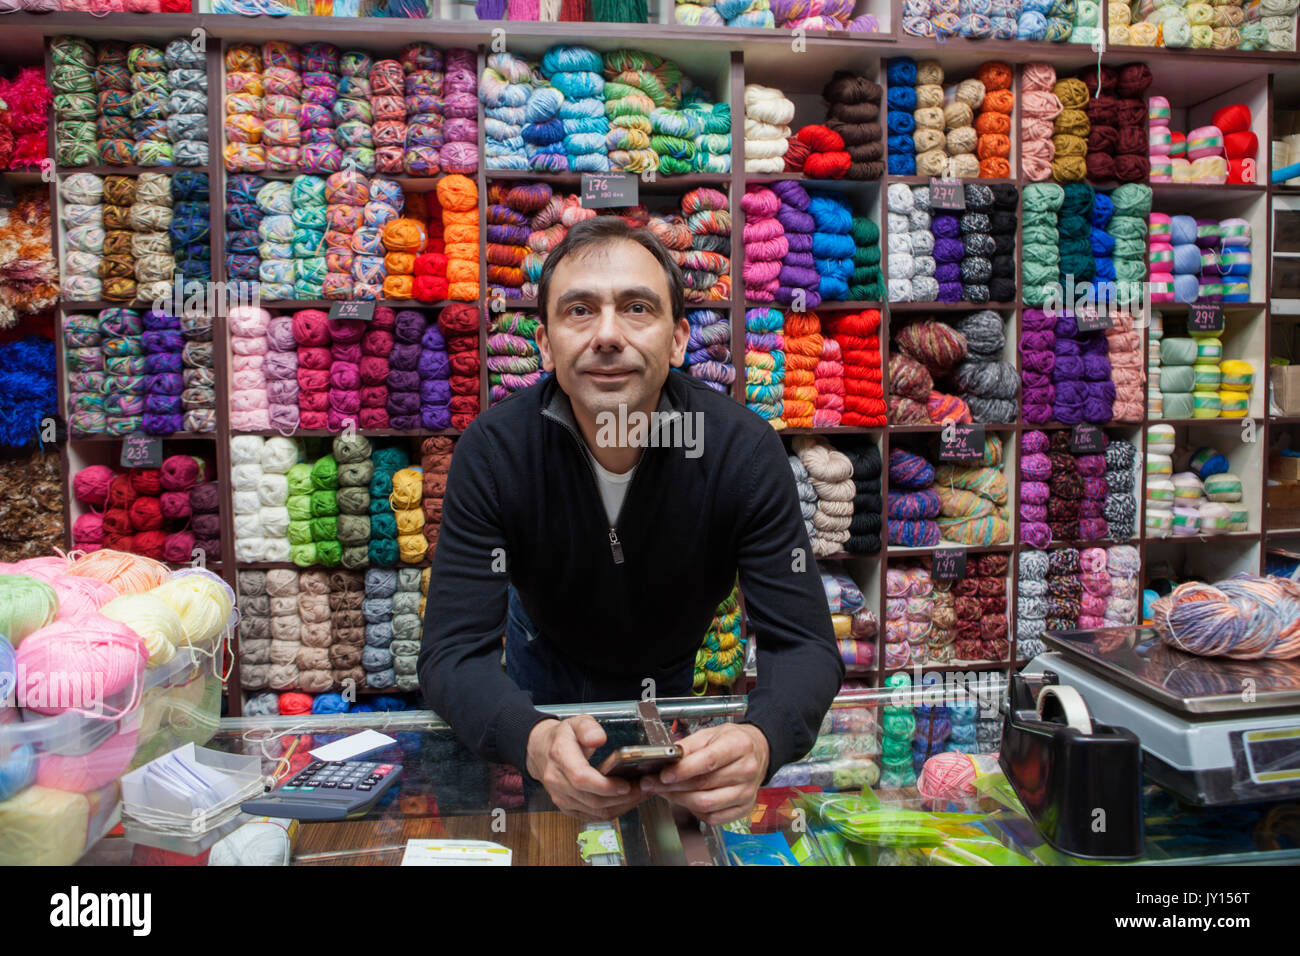 Mixed Race man texting on cell phone at yarn store Stock Photo